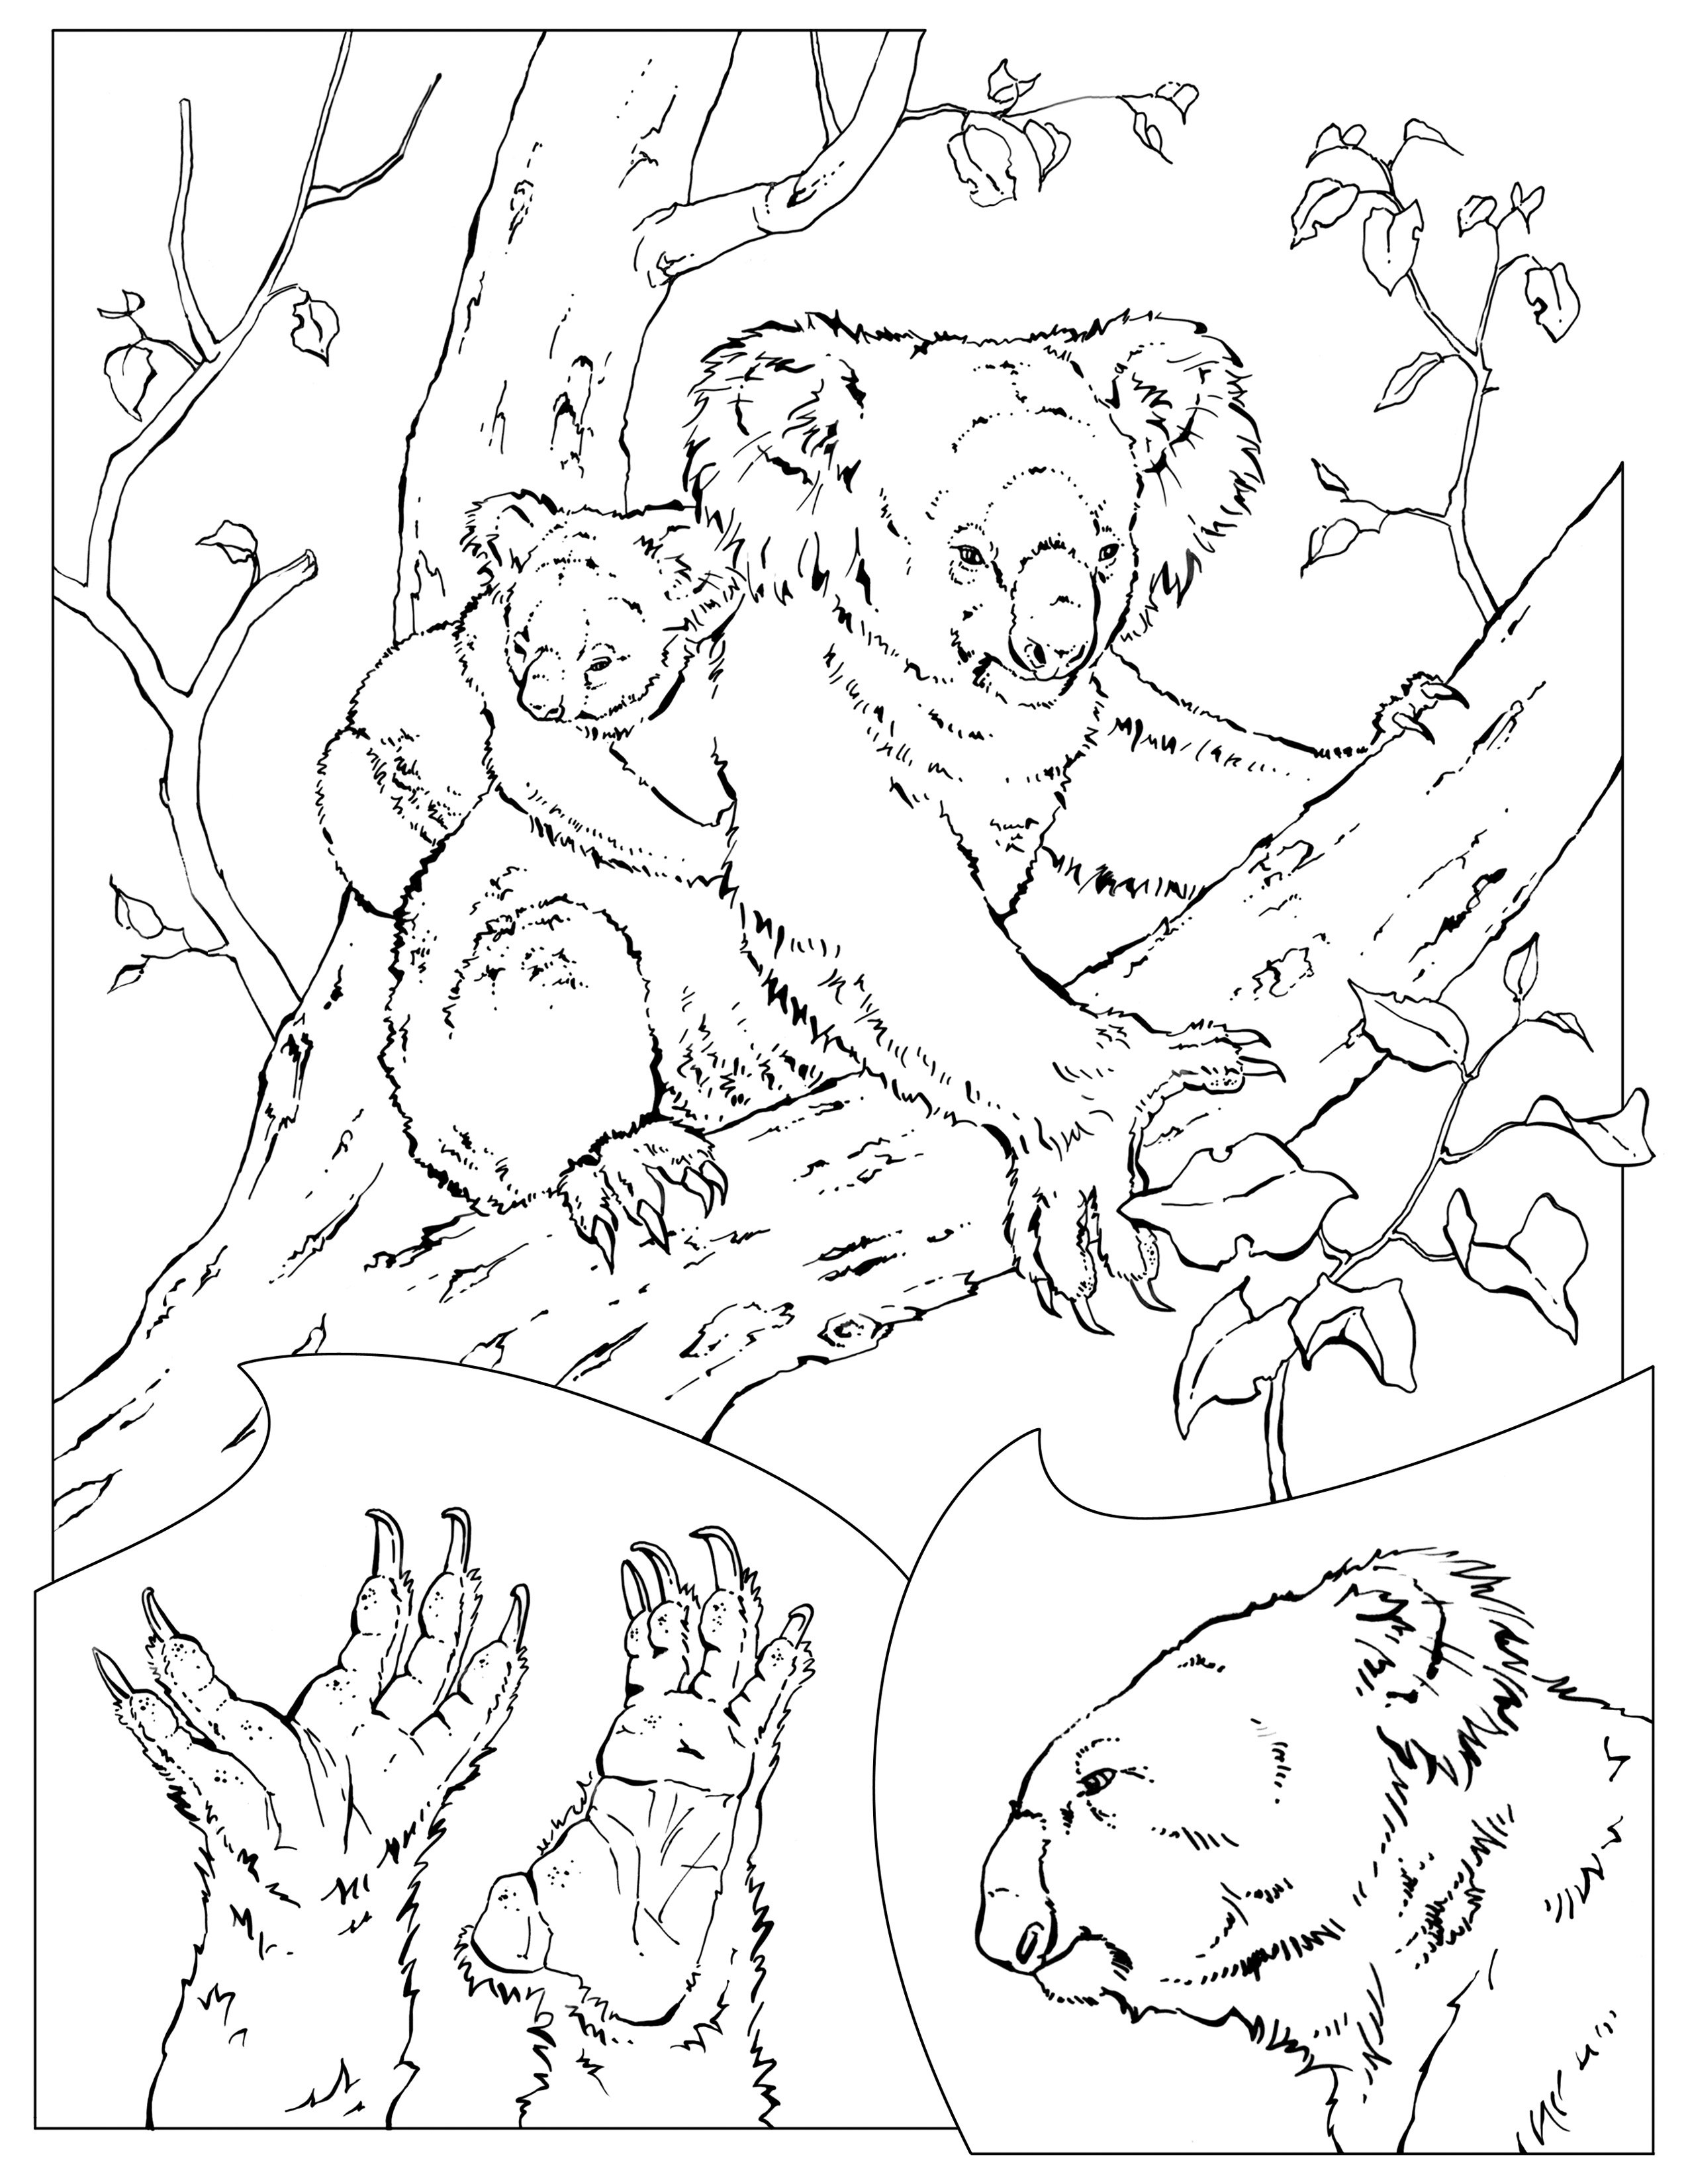 Coloring Pages – Wildlife Research & Conservation